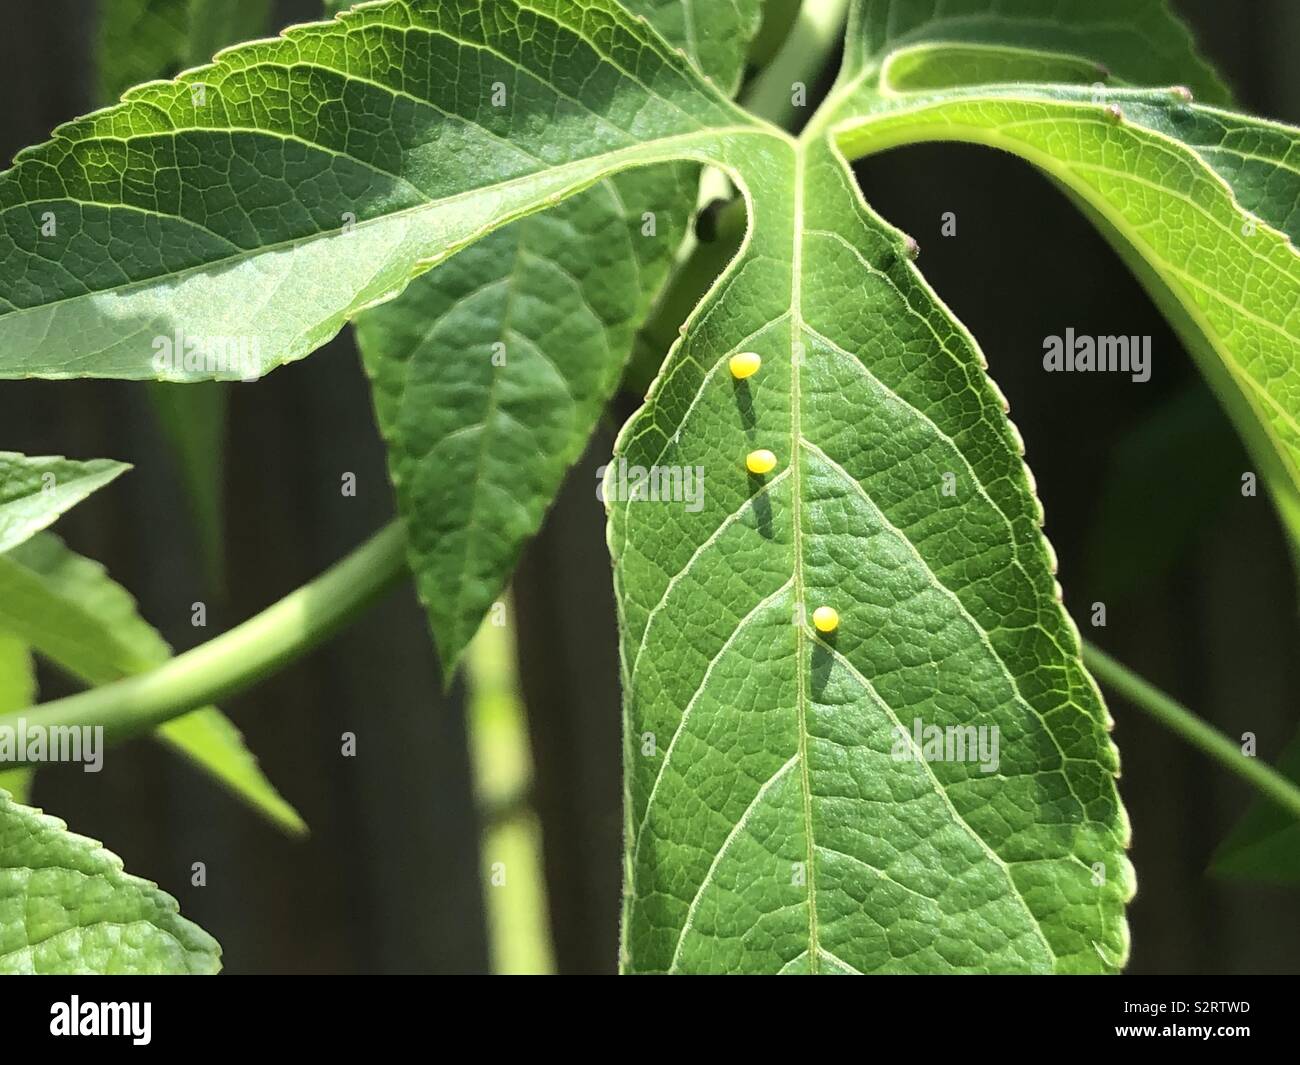 Gulf fritillary butterfly eggs on a passionflower plant Stock Photo